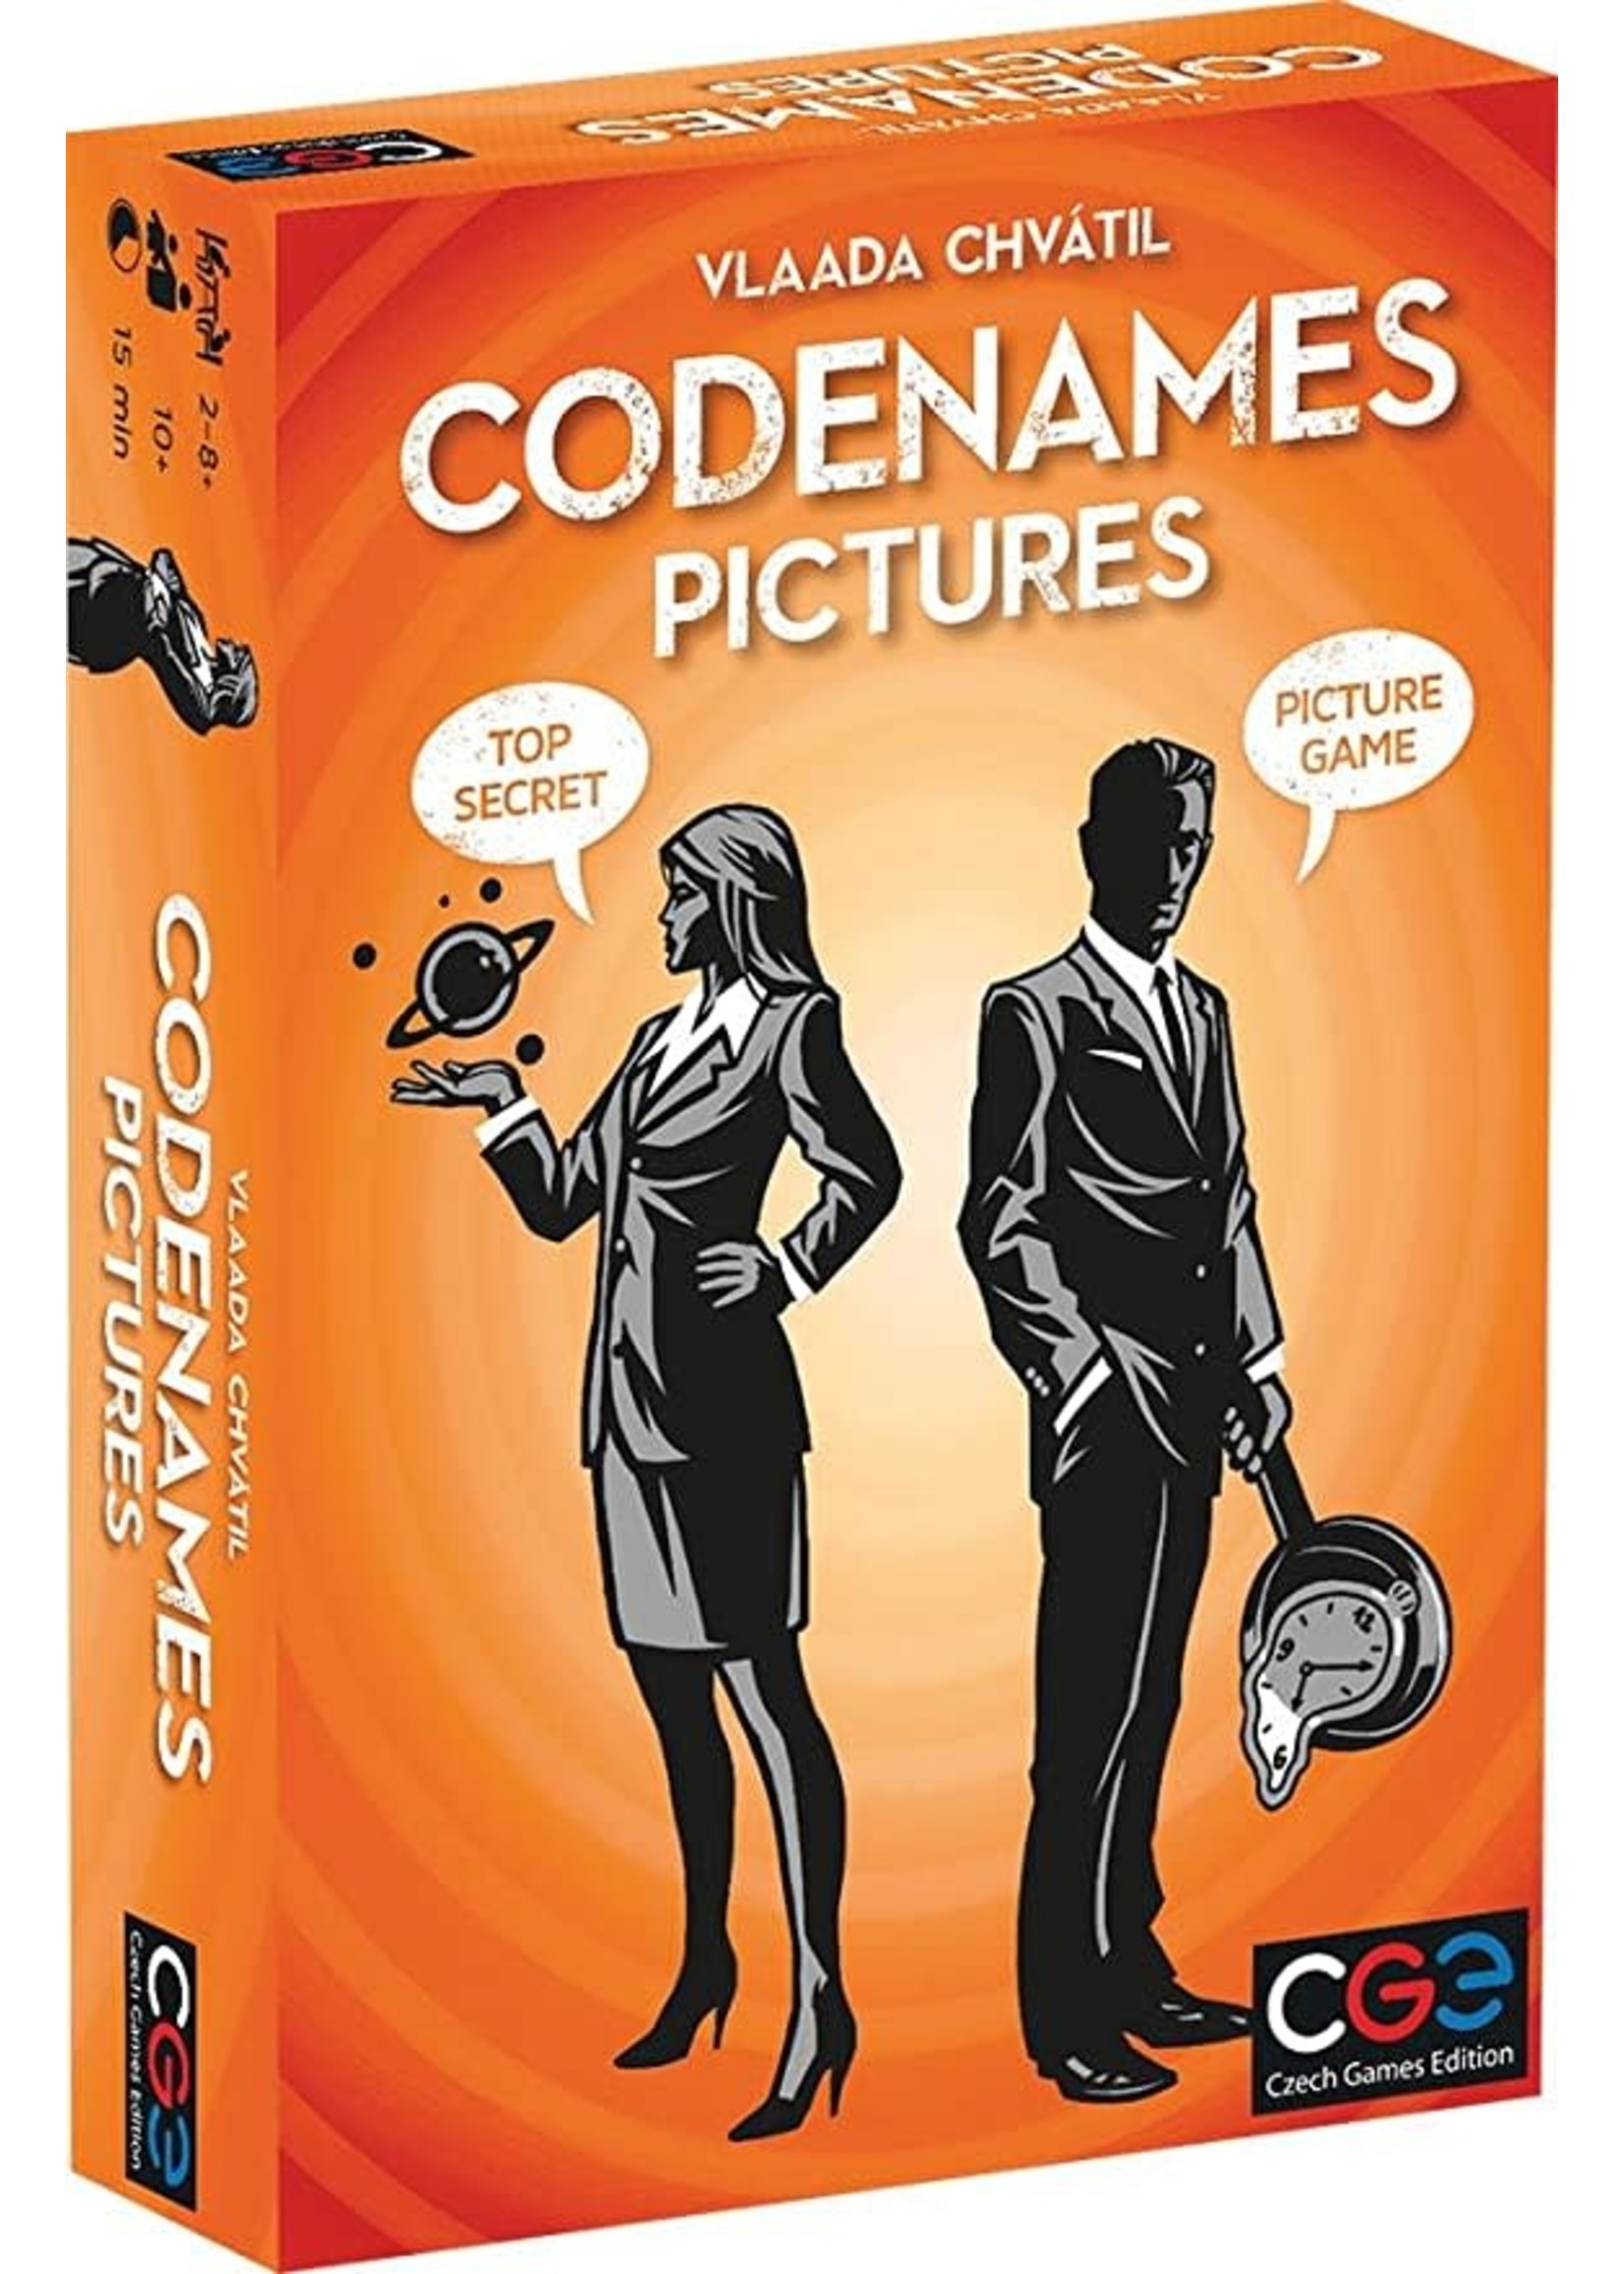 Czech Games Edition Codenames: Pictures